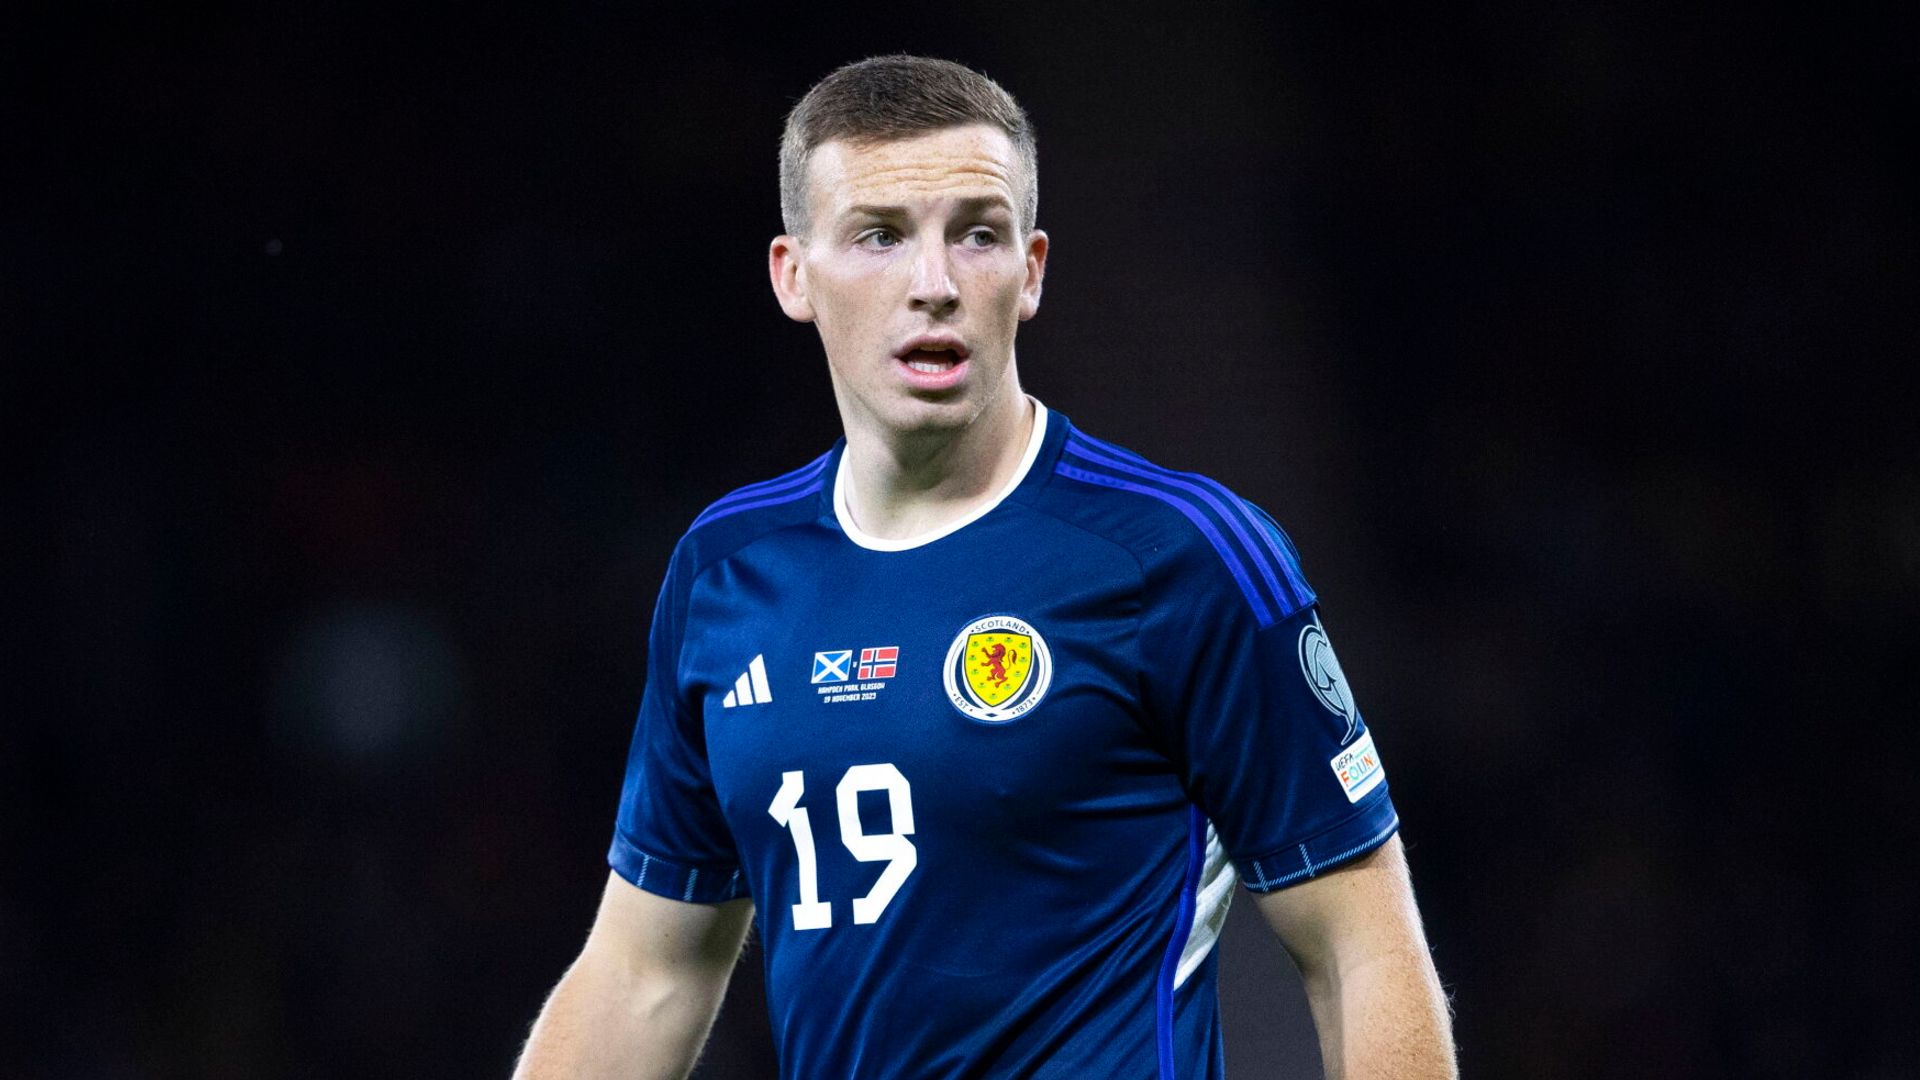 Ferguson ignoring speculation as he targets Euro success with Scotland